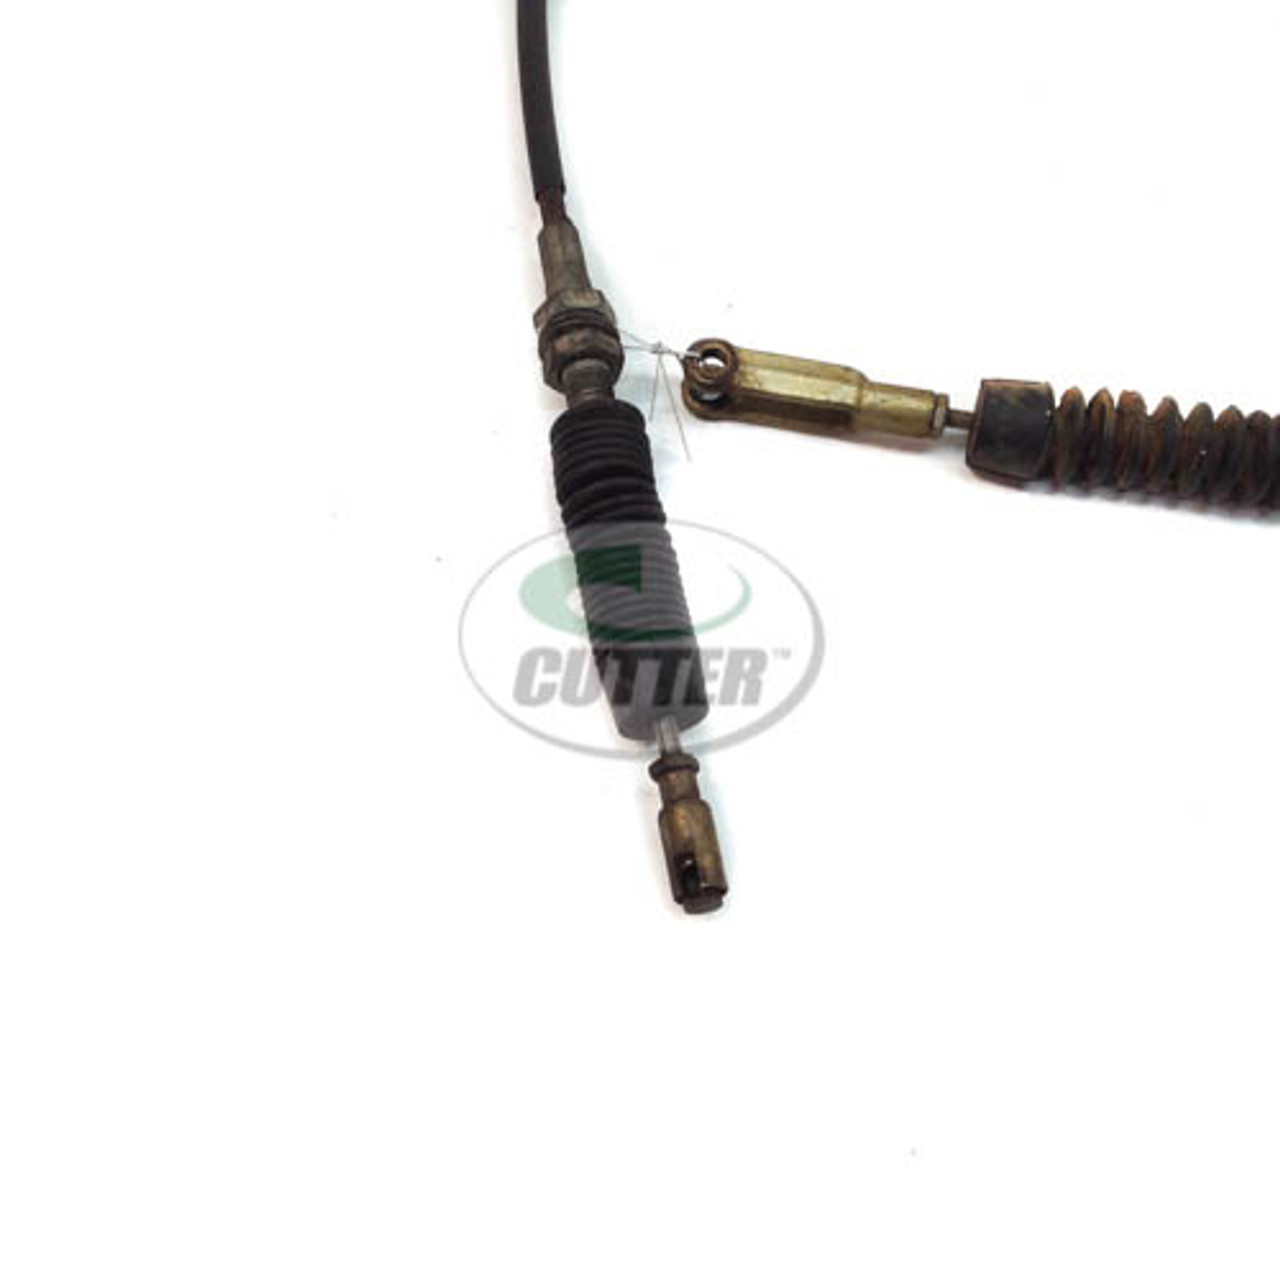 Toro Used Accelerator Cable - 100-8383